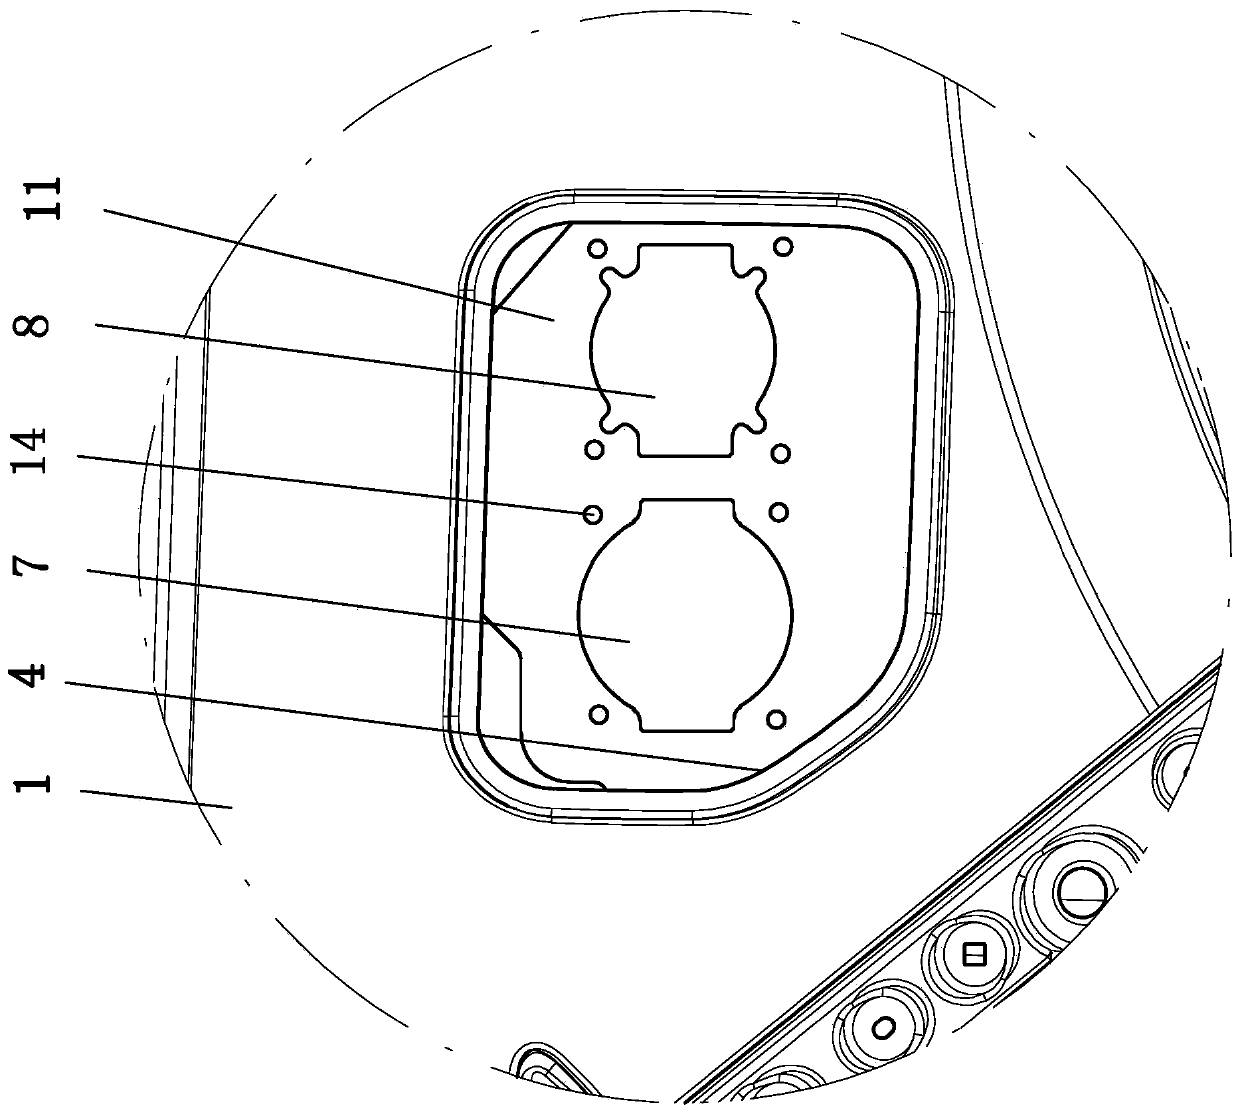 Electric vehicle charging socket mounting structure